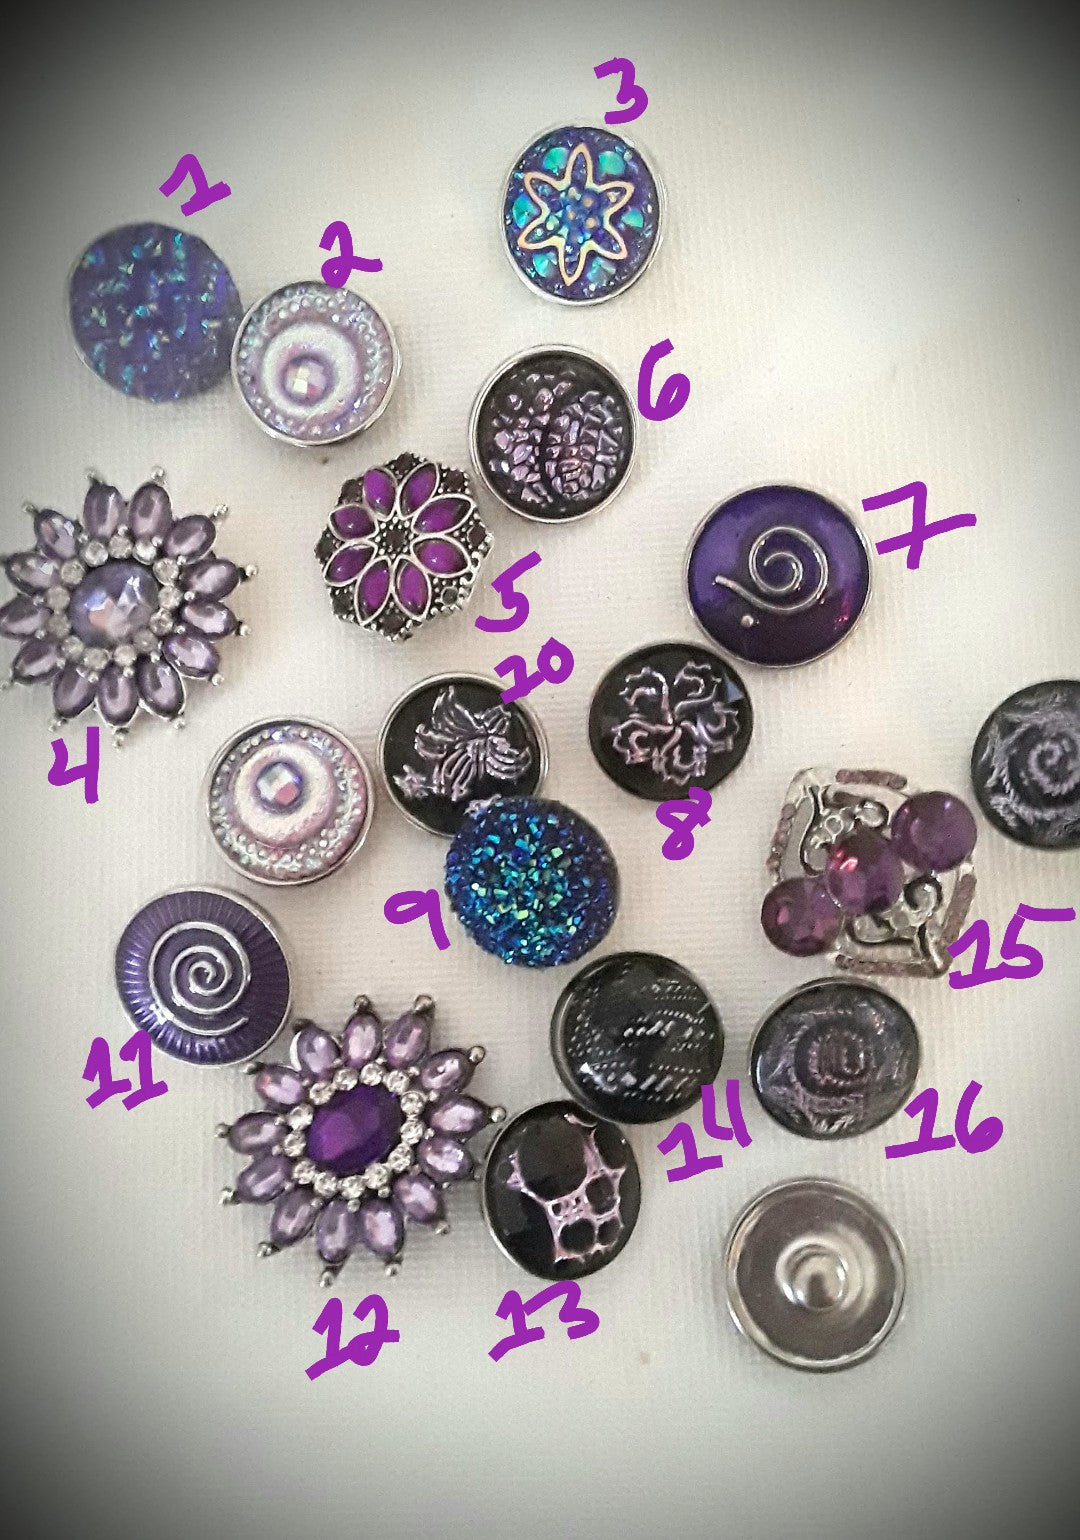 A variety of Purple snaps 18mm noosa snaps